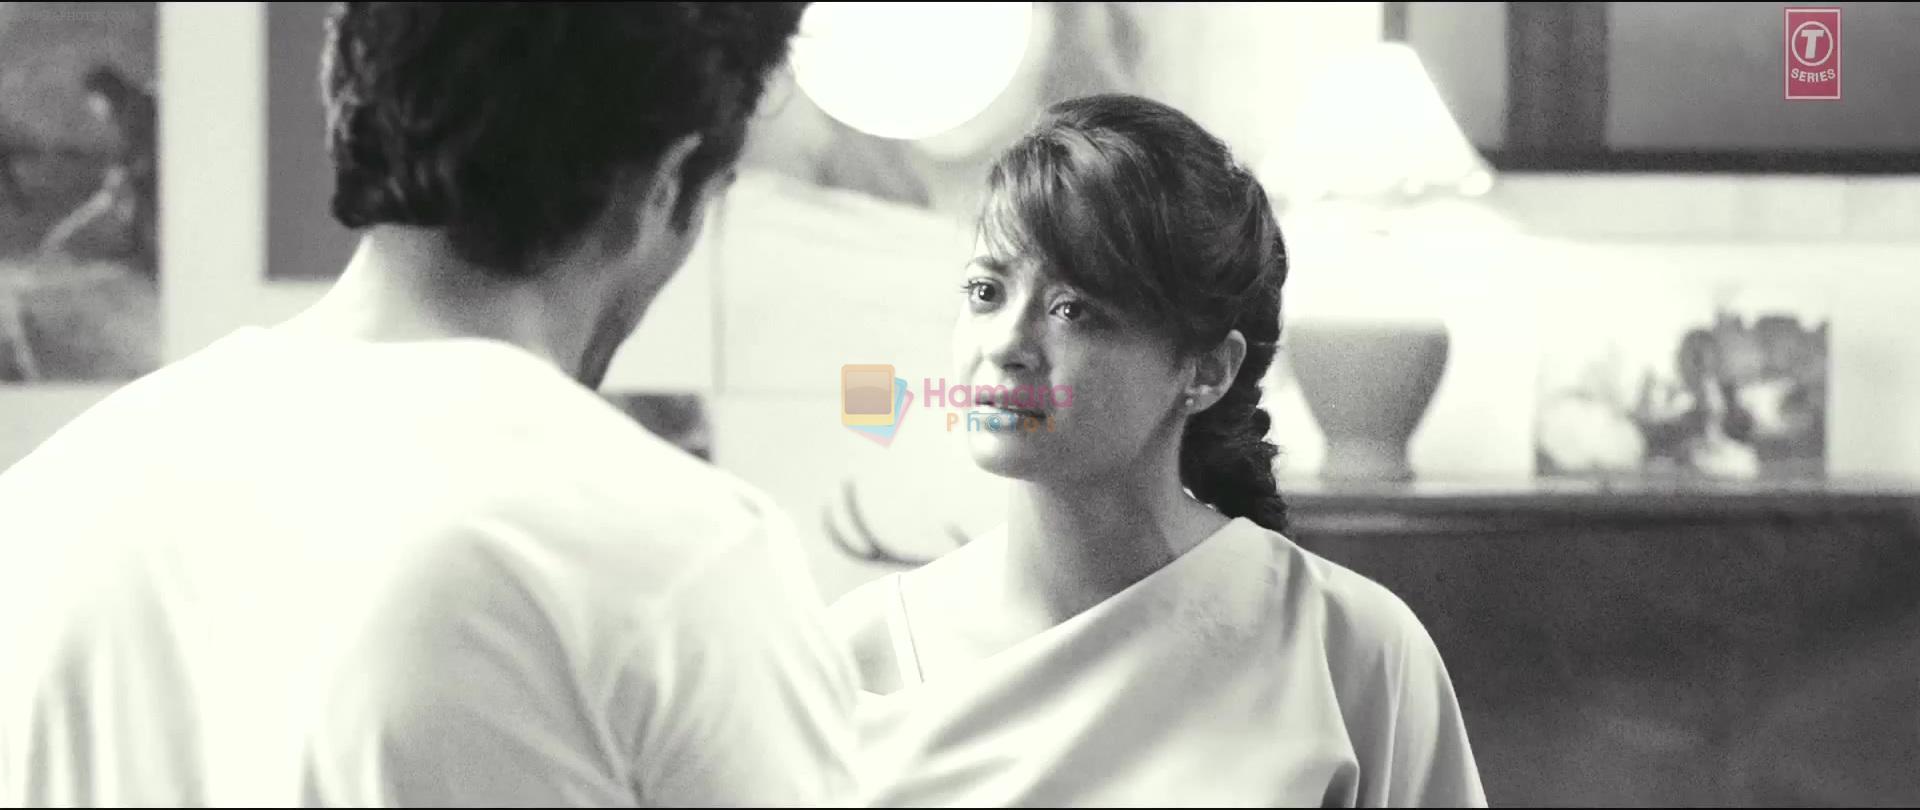 Surveen Chawla in the still from movie Hate Story 2